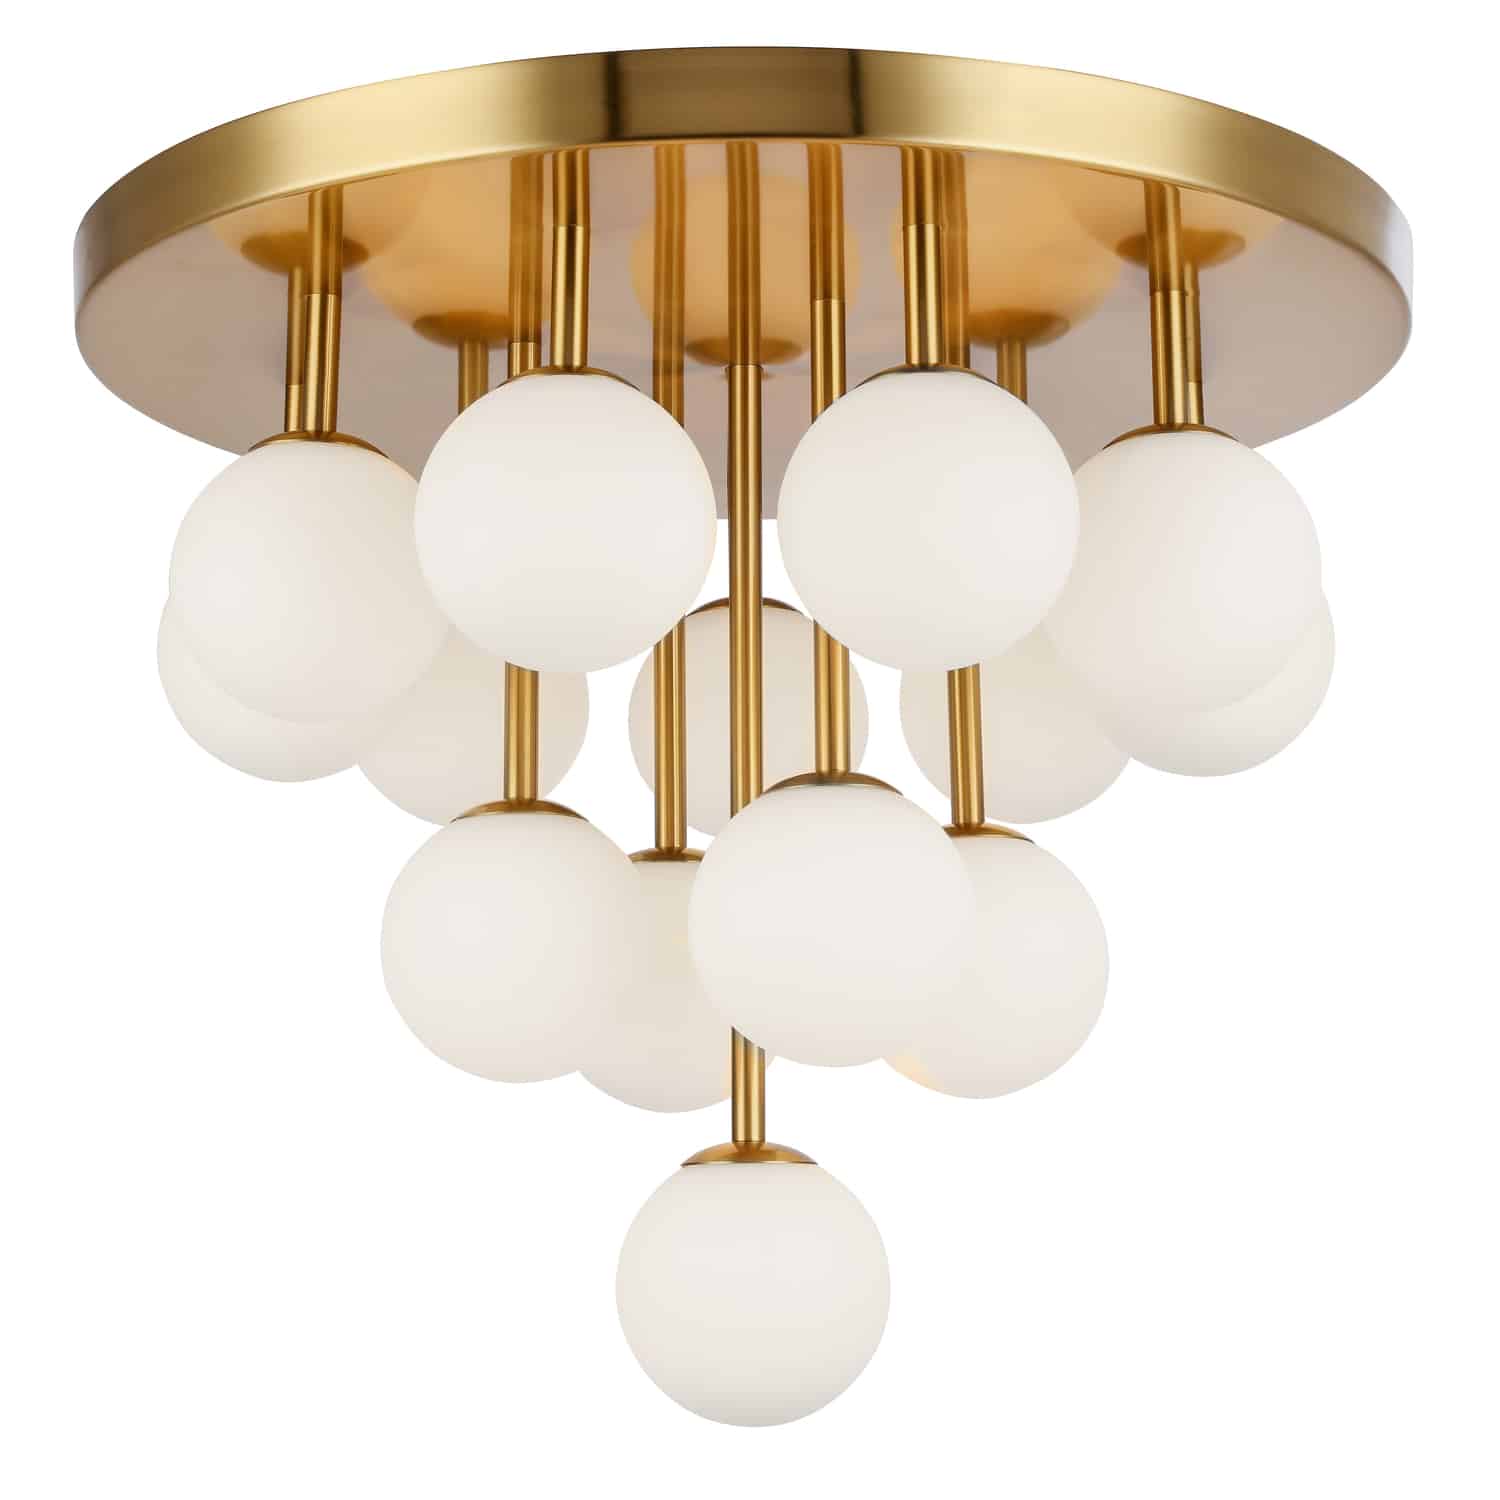 Beautifully bright and full of curvy movement, the Megallan family of lighting will become a focal point of any space where it's installed. The design features variations on the theme of hanging glass globes for a look that's elegant and eye-catching. The metal base comes in various configurations, and choice of polished chrome, aged brass, or matte black finish depending on the format. With either horizontal or symmetrical options, Megallan lighting will draw attention to your furnishings in a modern or contemporary décor. Opal glass creates a subtle reflection of light, with options that will suit living and dining rooms, as well as the main entrance or hallway of your home.